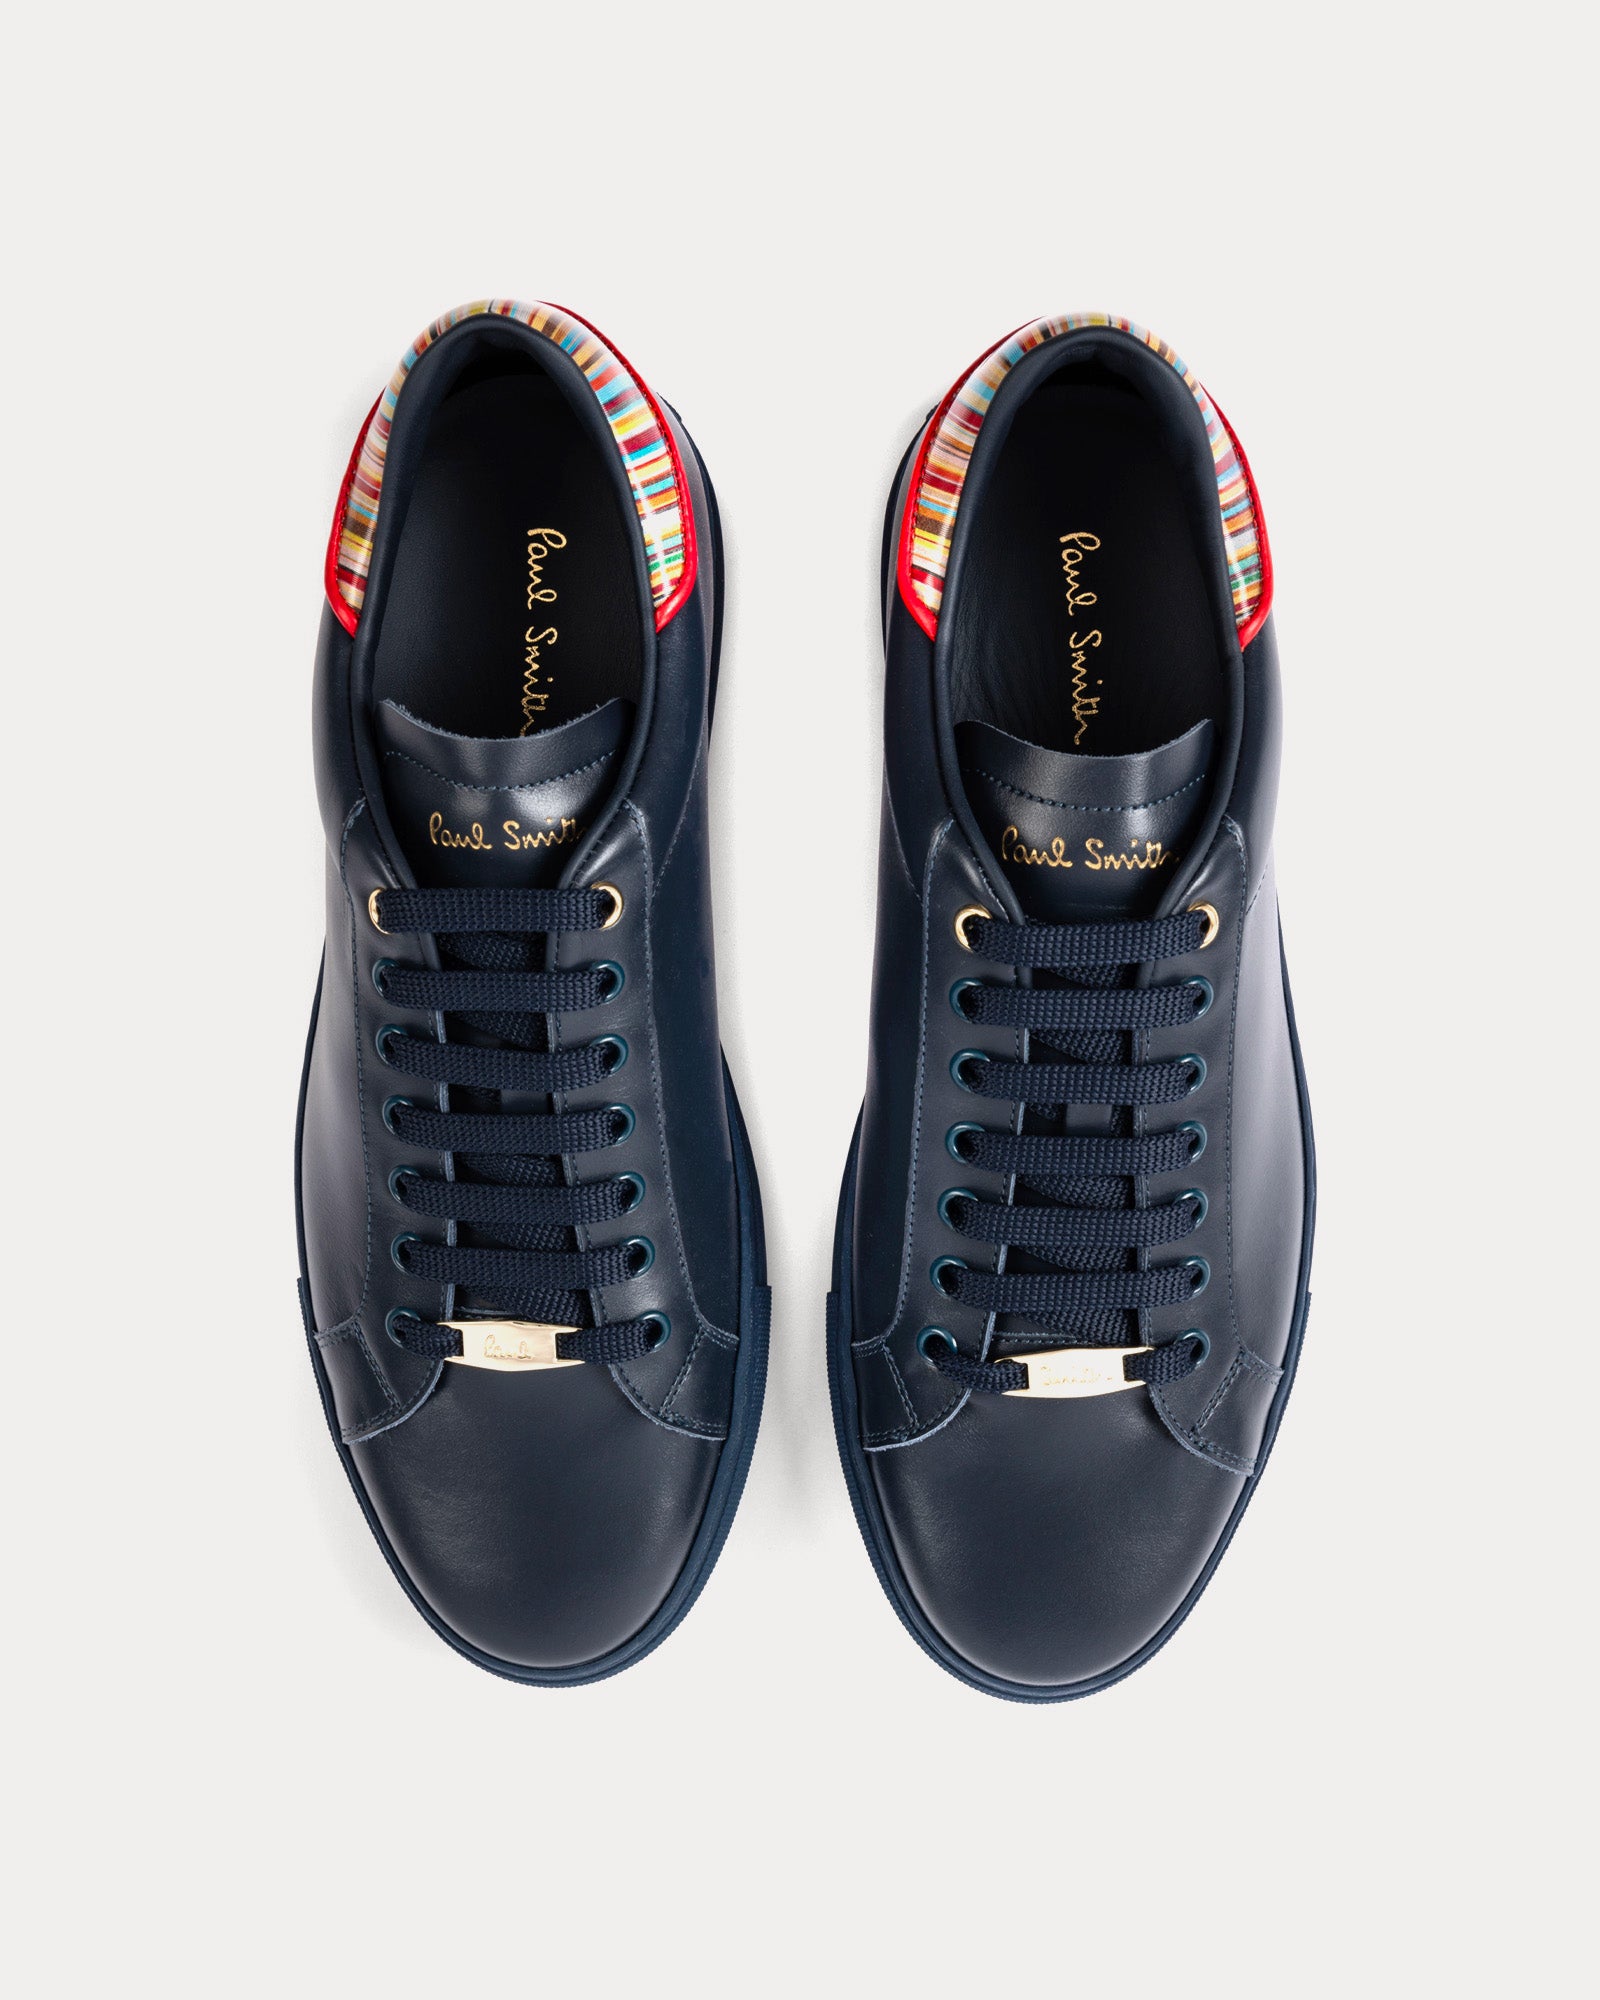 Paul Smith - Beck with Signature Stripe Leather Navy Low Top Sneakers